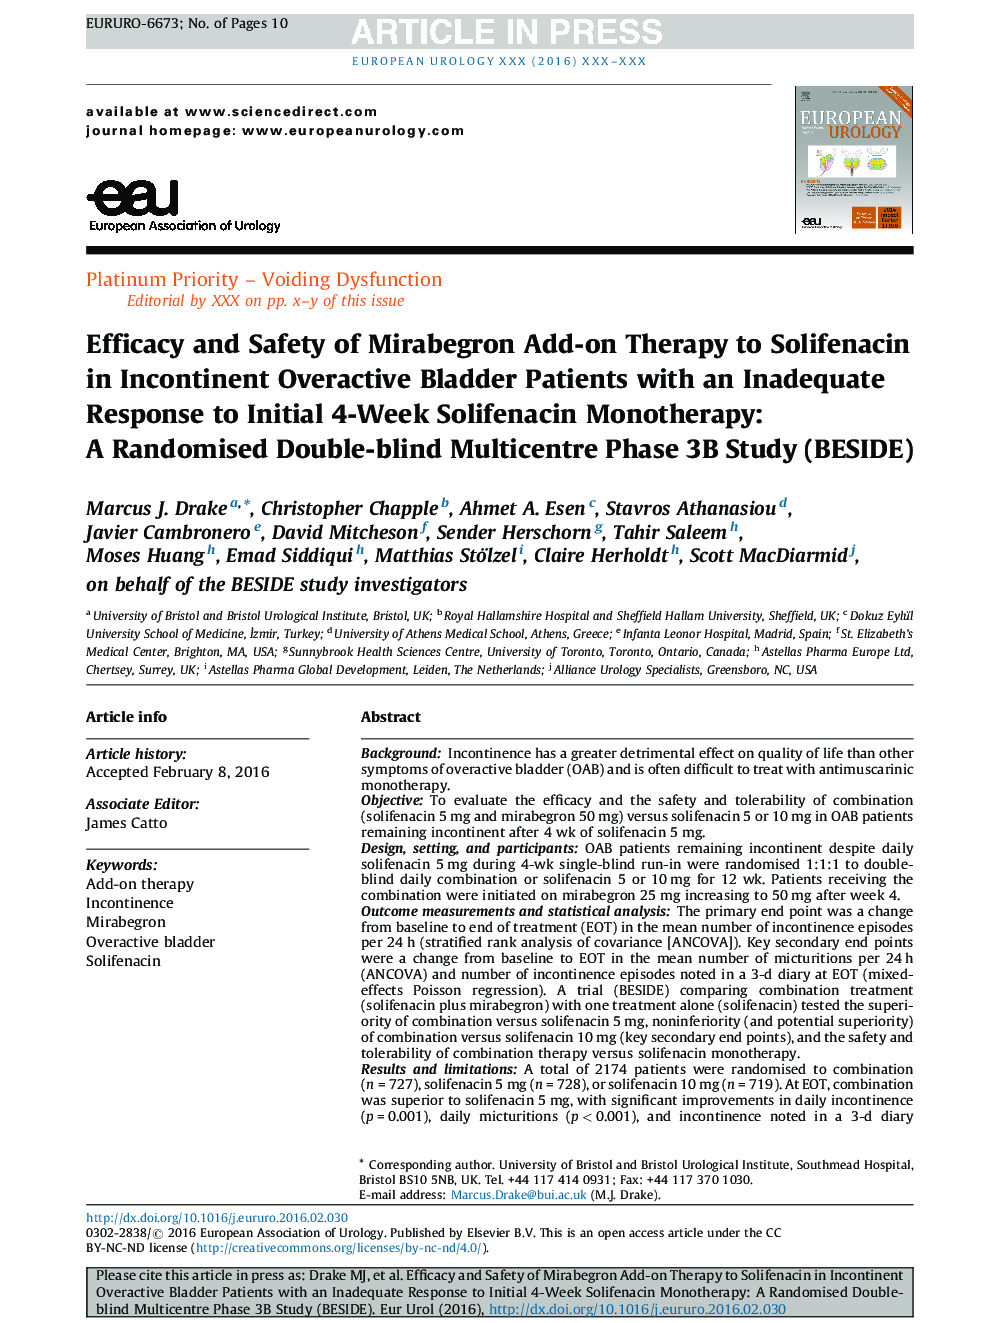 Efficacy and Safety of Mirabegron Add-on Therapy to Solifenacin in Incontinent Overactive Bladder Patients with an Inadequate Response to Initial 4-Week Solifenacin Monotherapy: A Randomised Double-blind Multicentre Phase 3B Study (BESIDE)